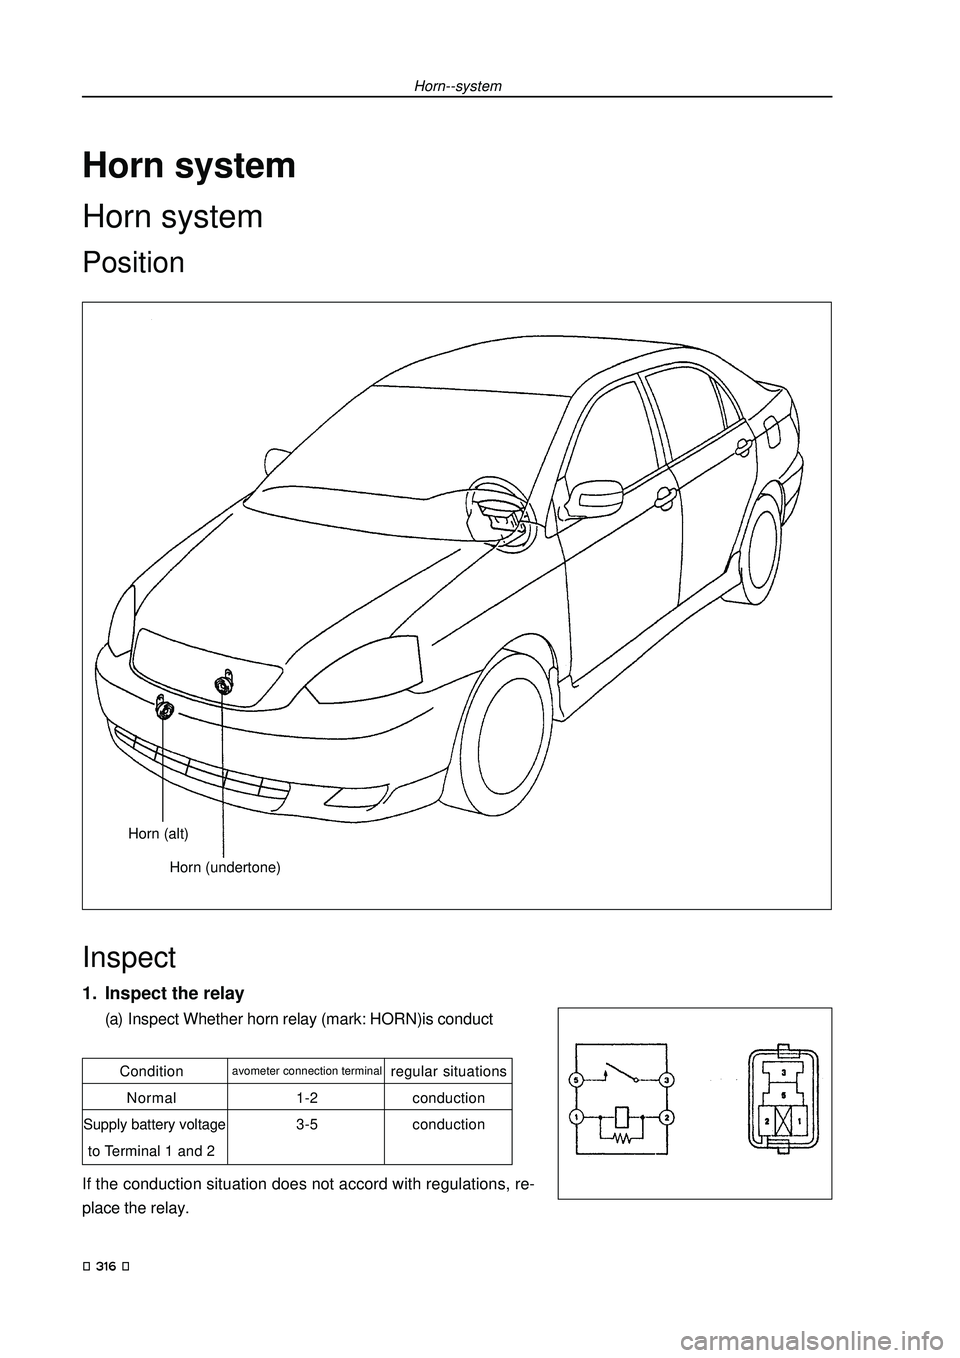 GEELY FC 2008  Workshop Manual Horn--system
Horn system
Horn system
Position
Inspect
1. Inspect the relay
(a) Inspect Whether horn relay (mark: HORN)is conduct
If the conduction situation does not accord with regulations, re-
place